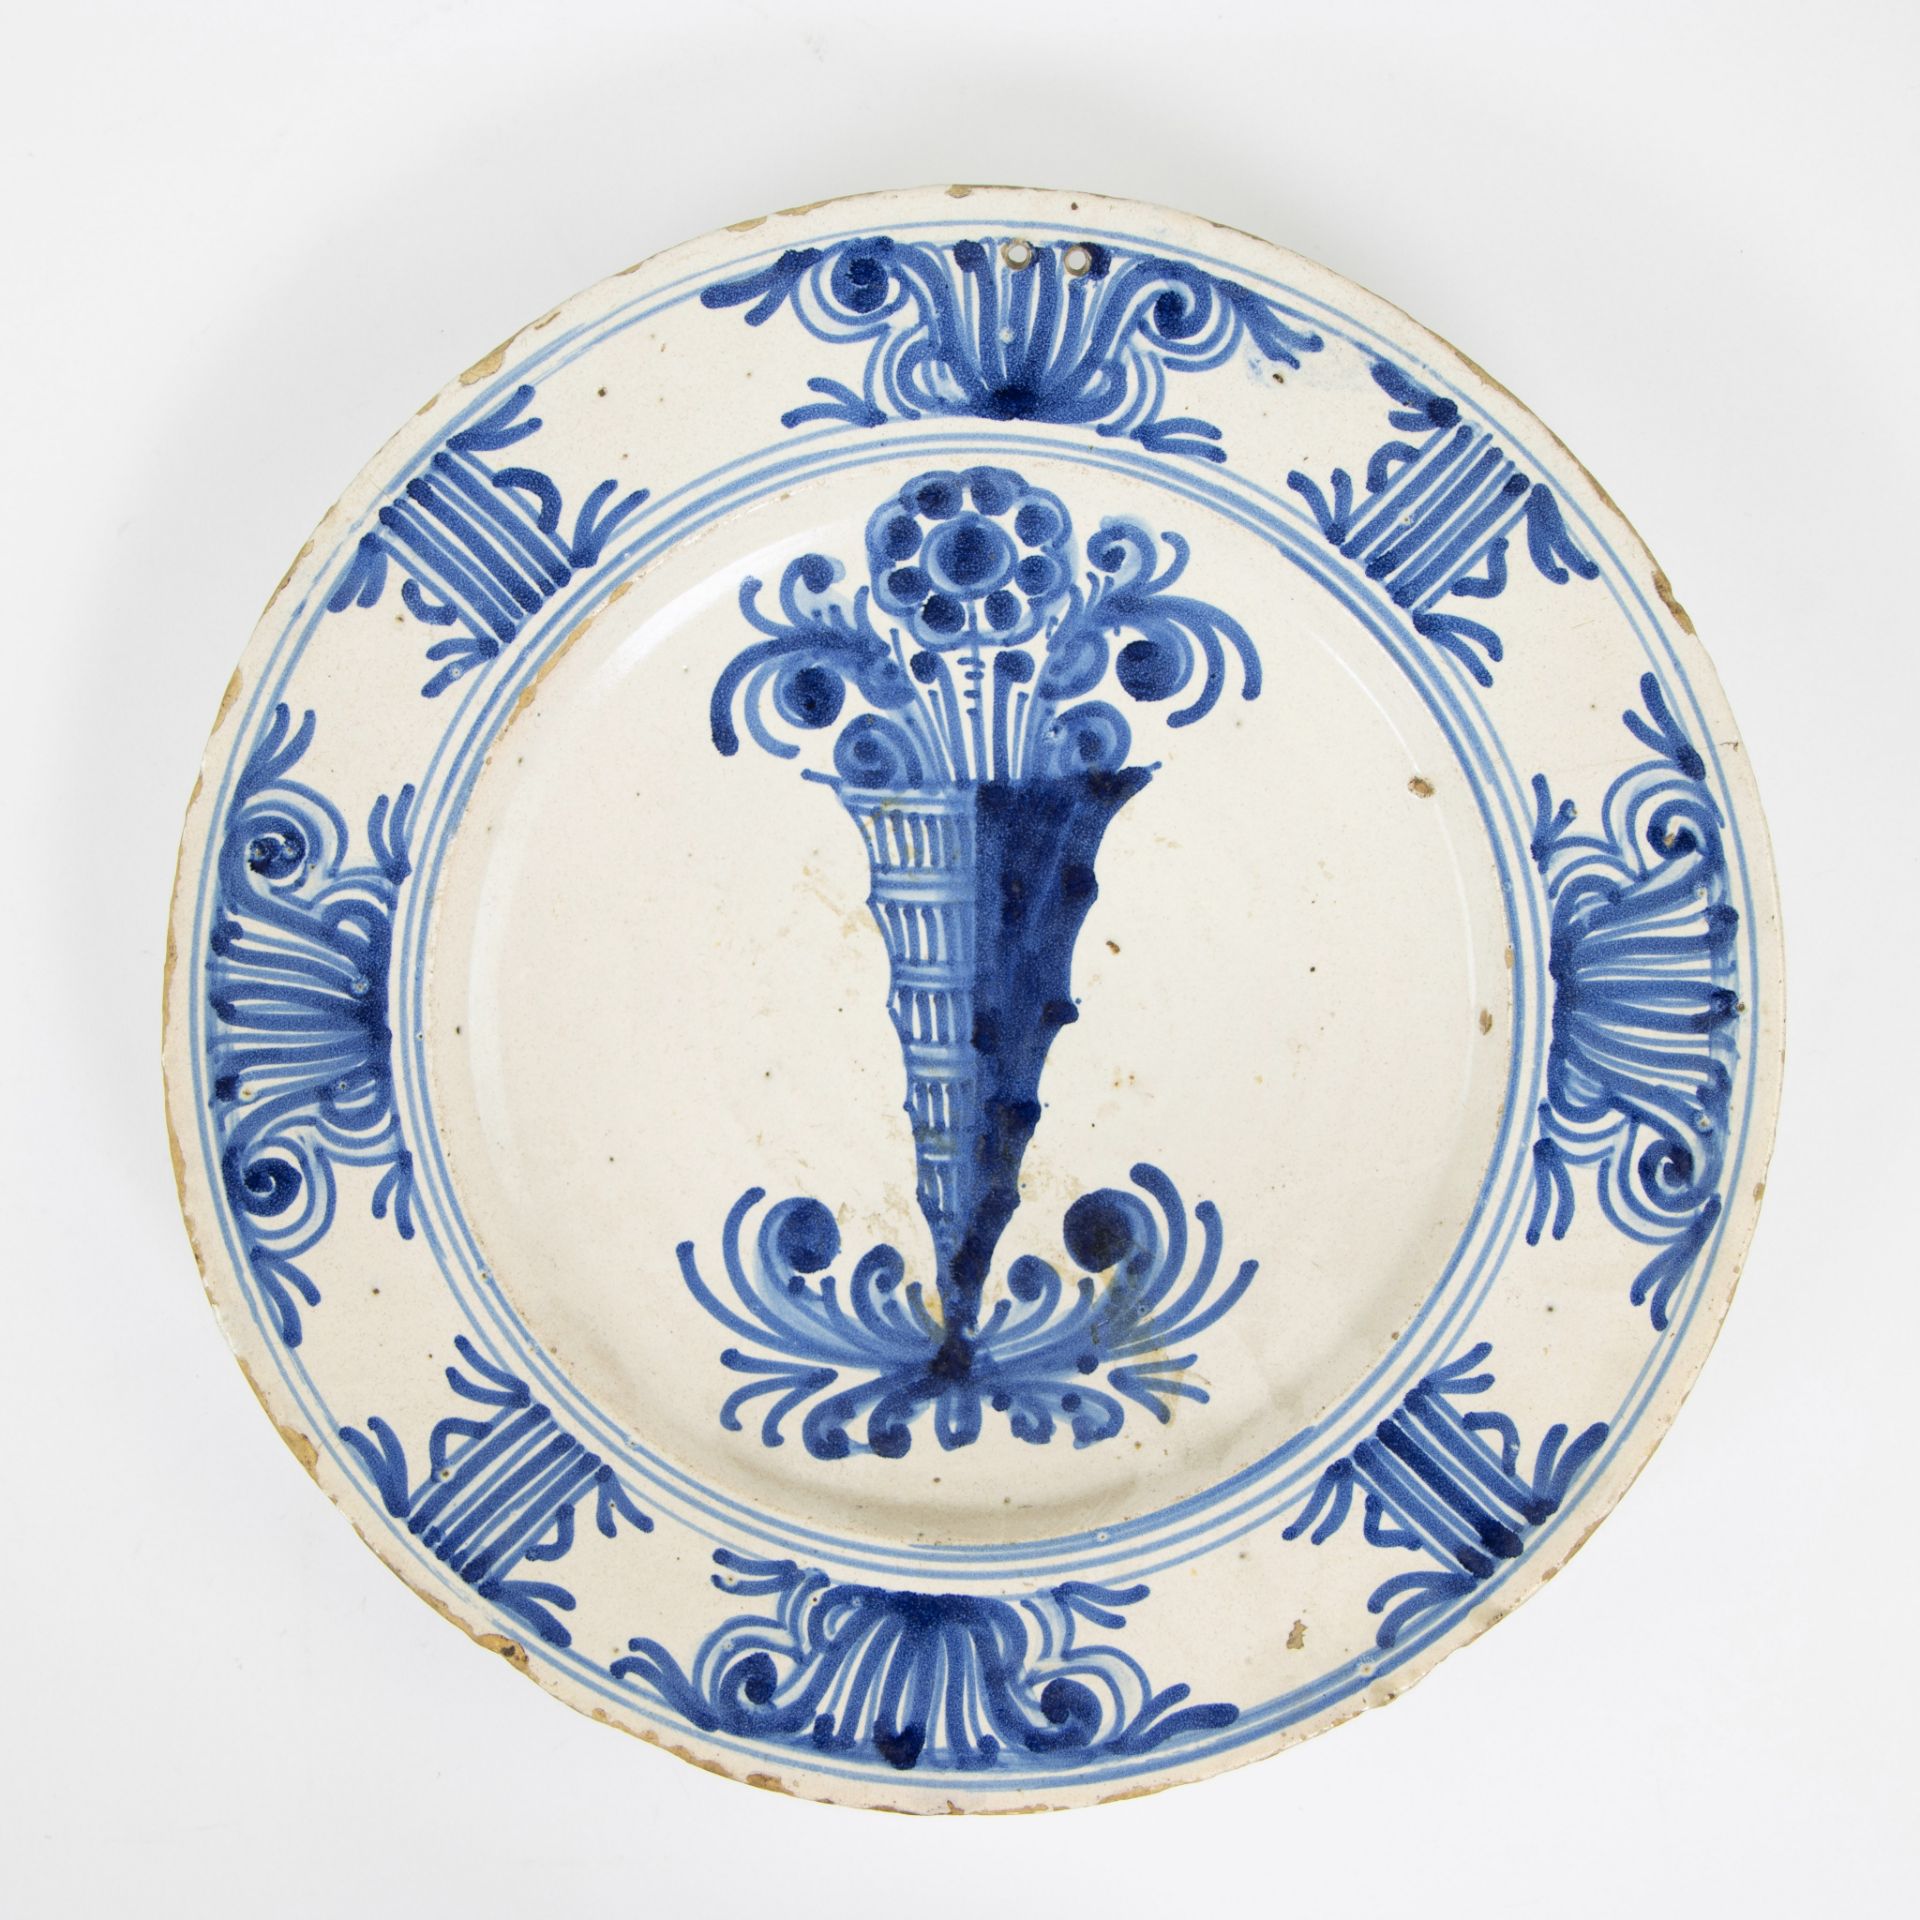 Delft dish 17th century and plate fisherman 18th century - Image 2 of 5